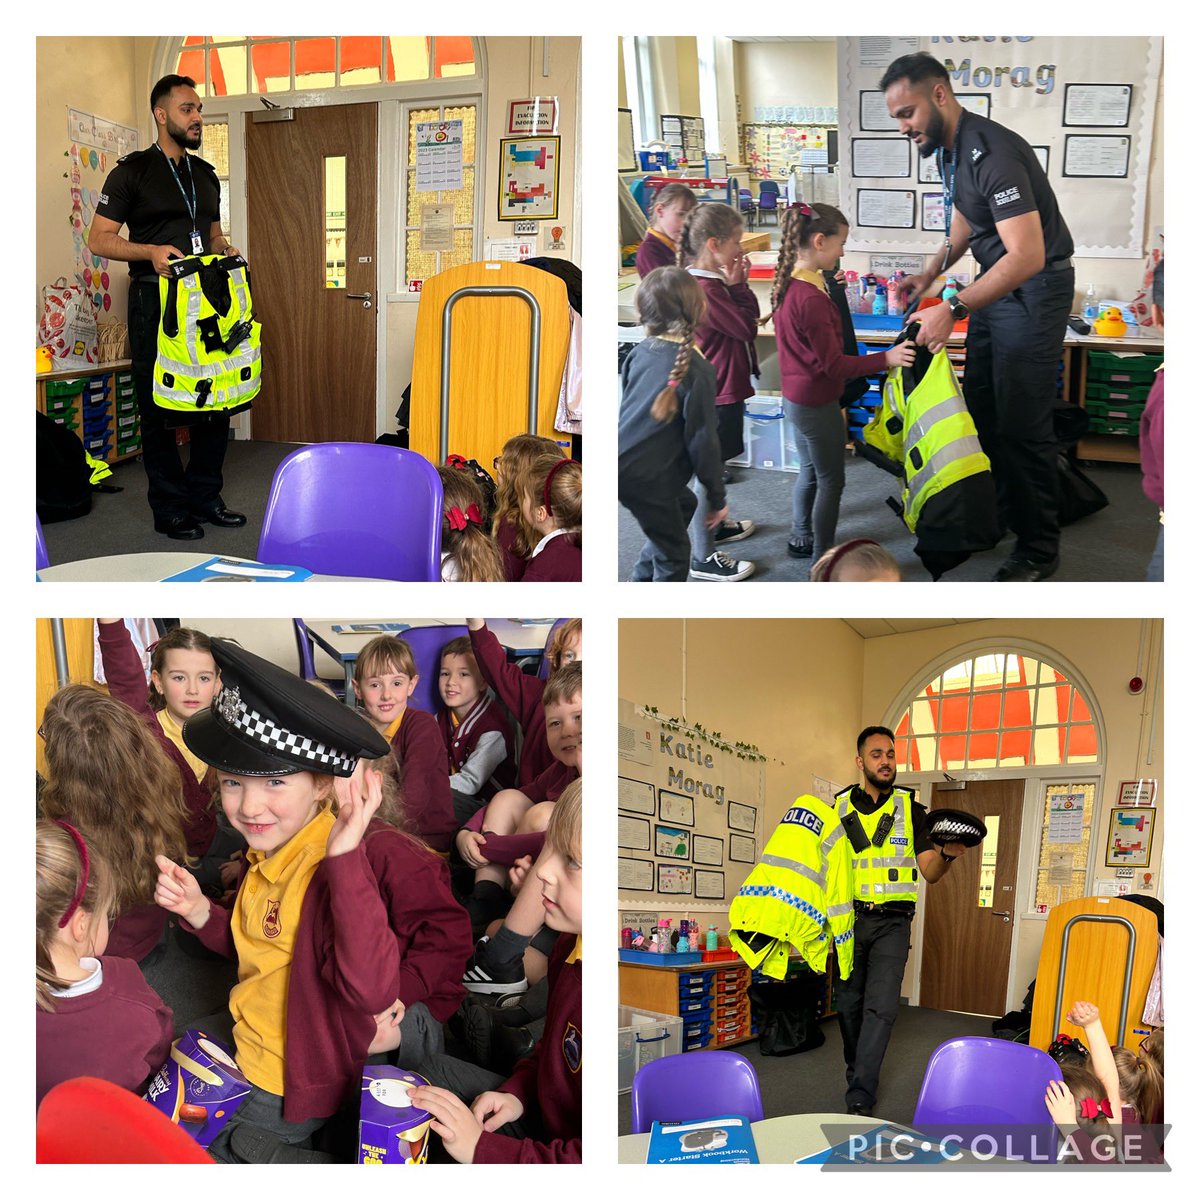 To kickoff careers fortnight, Primary 2 enjoyed a fantastic visit from a pupil’s parent who works as a police officer. The children loved asking questions and getting to try some of the uniform. #raisingaspirations #careersfortnight